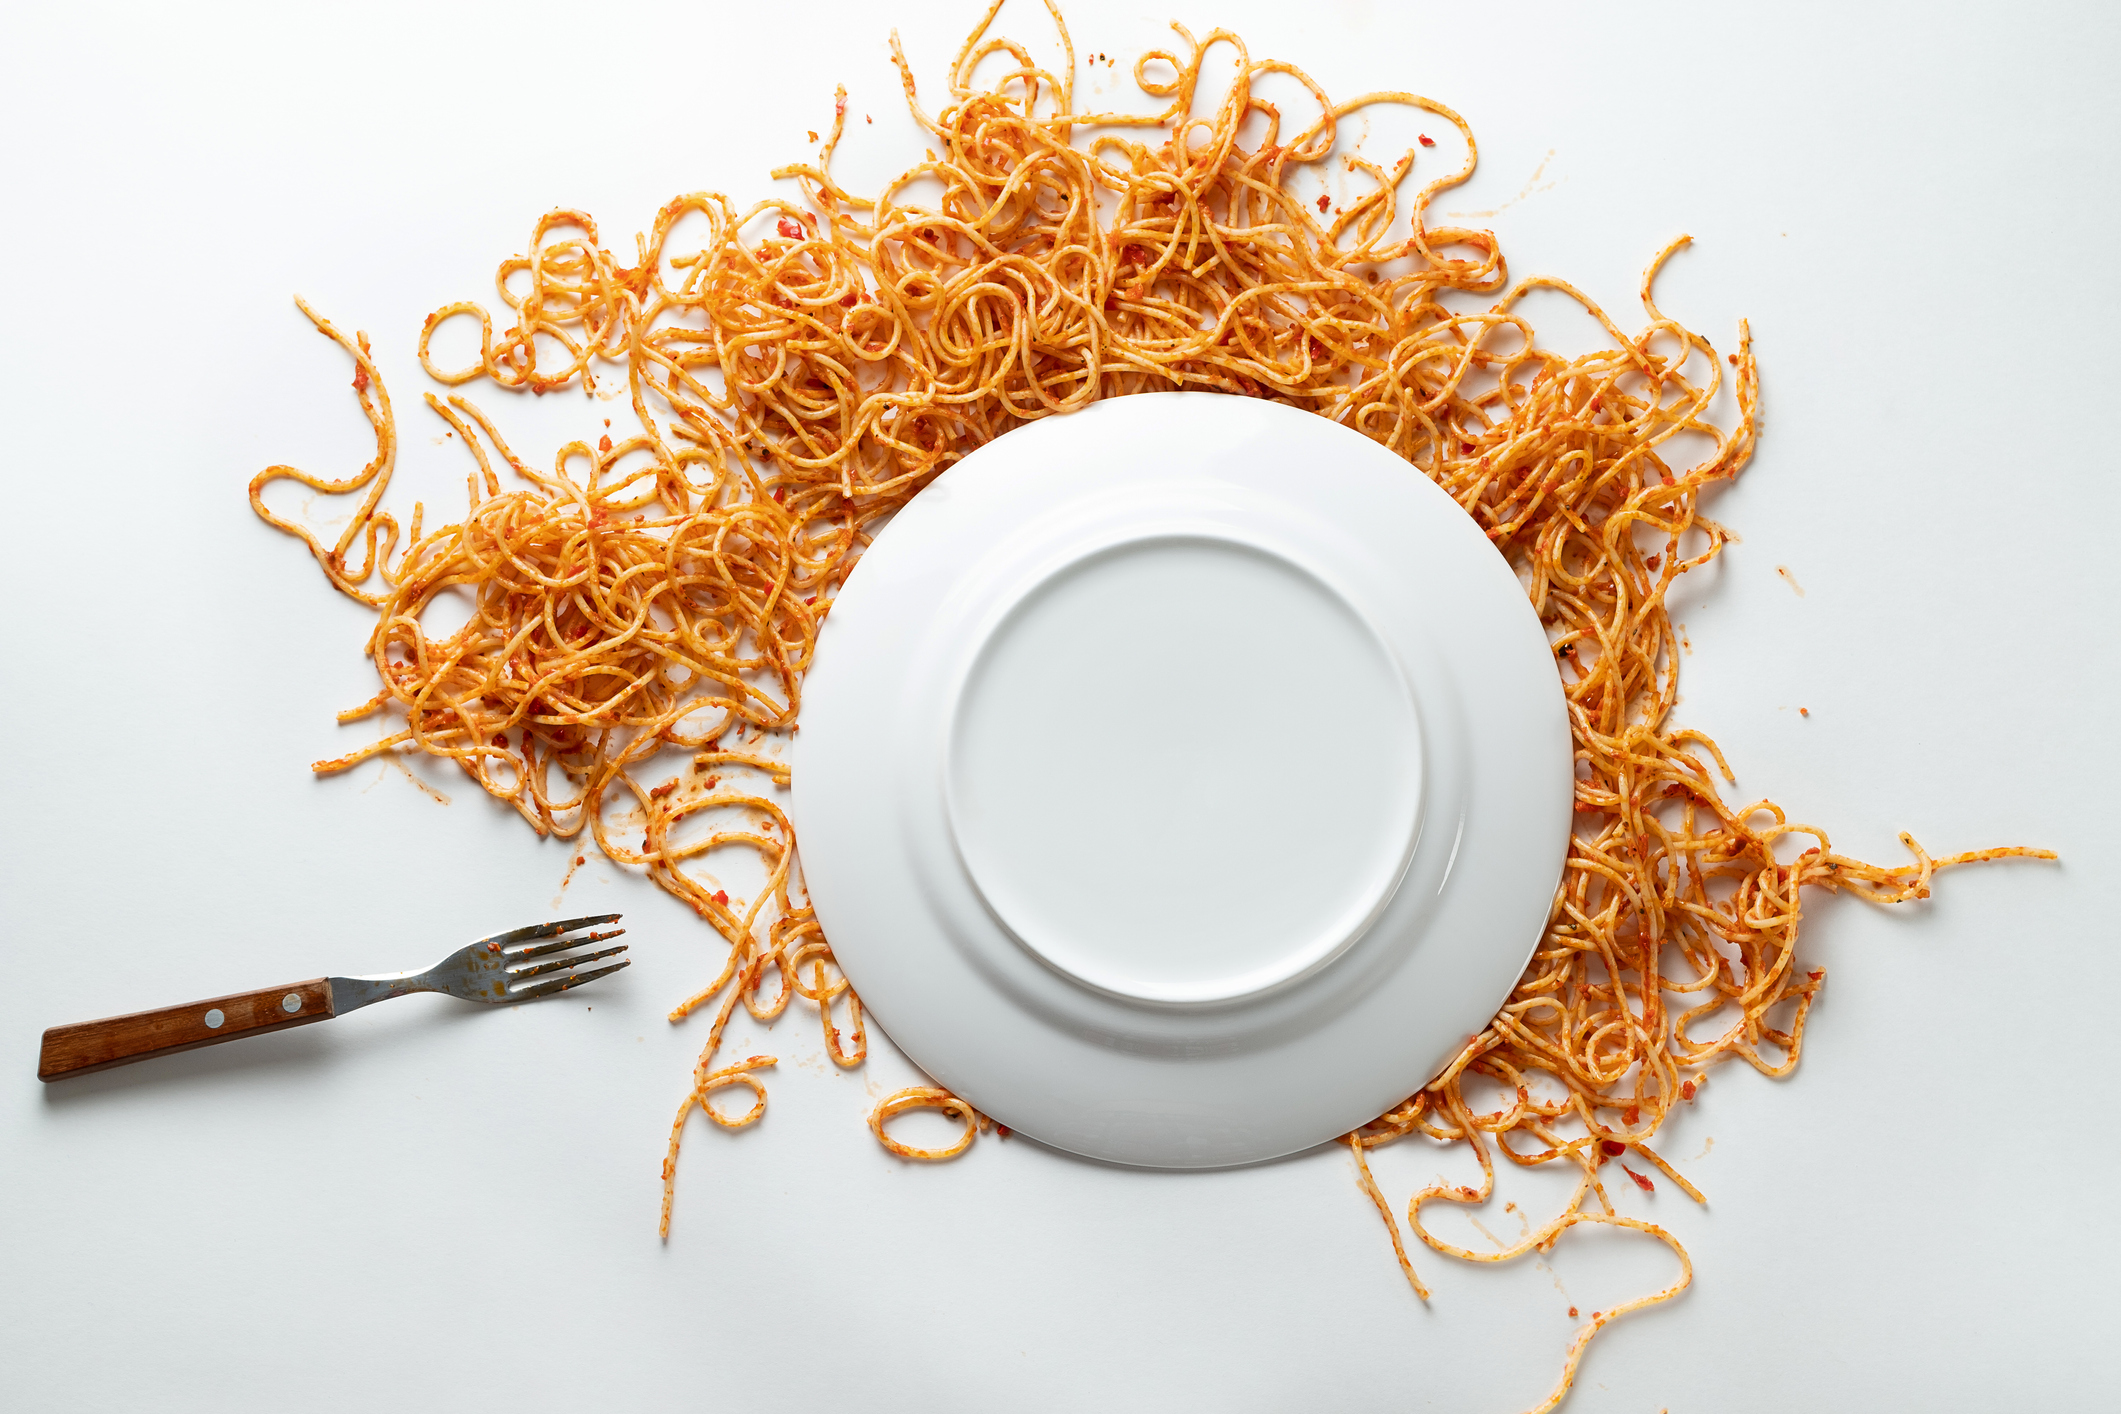 A plate of white porcelain spaghetti was spilled, with a fork next to it.  Pasta bolognese in tomato sauce scattered on a white background or table.  Concept of vegetarian and vegan food.  food background.  Copy of text space.